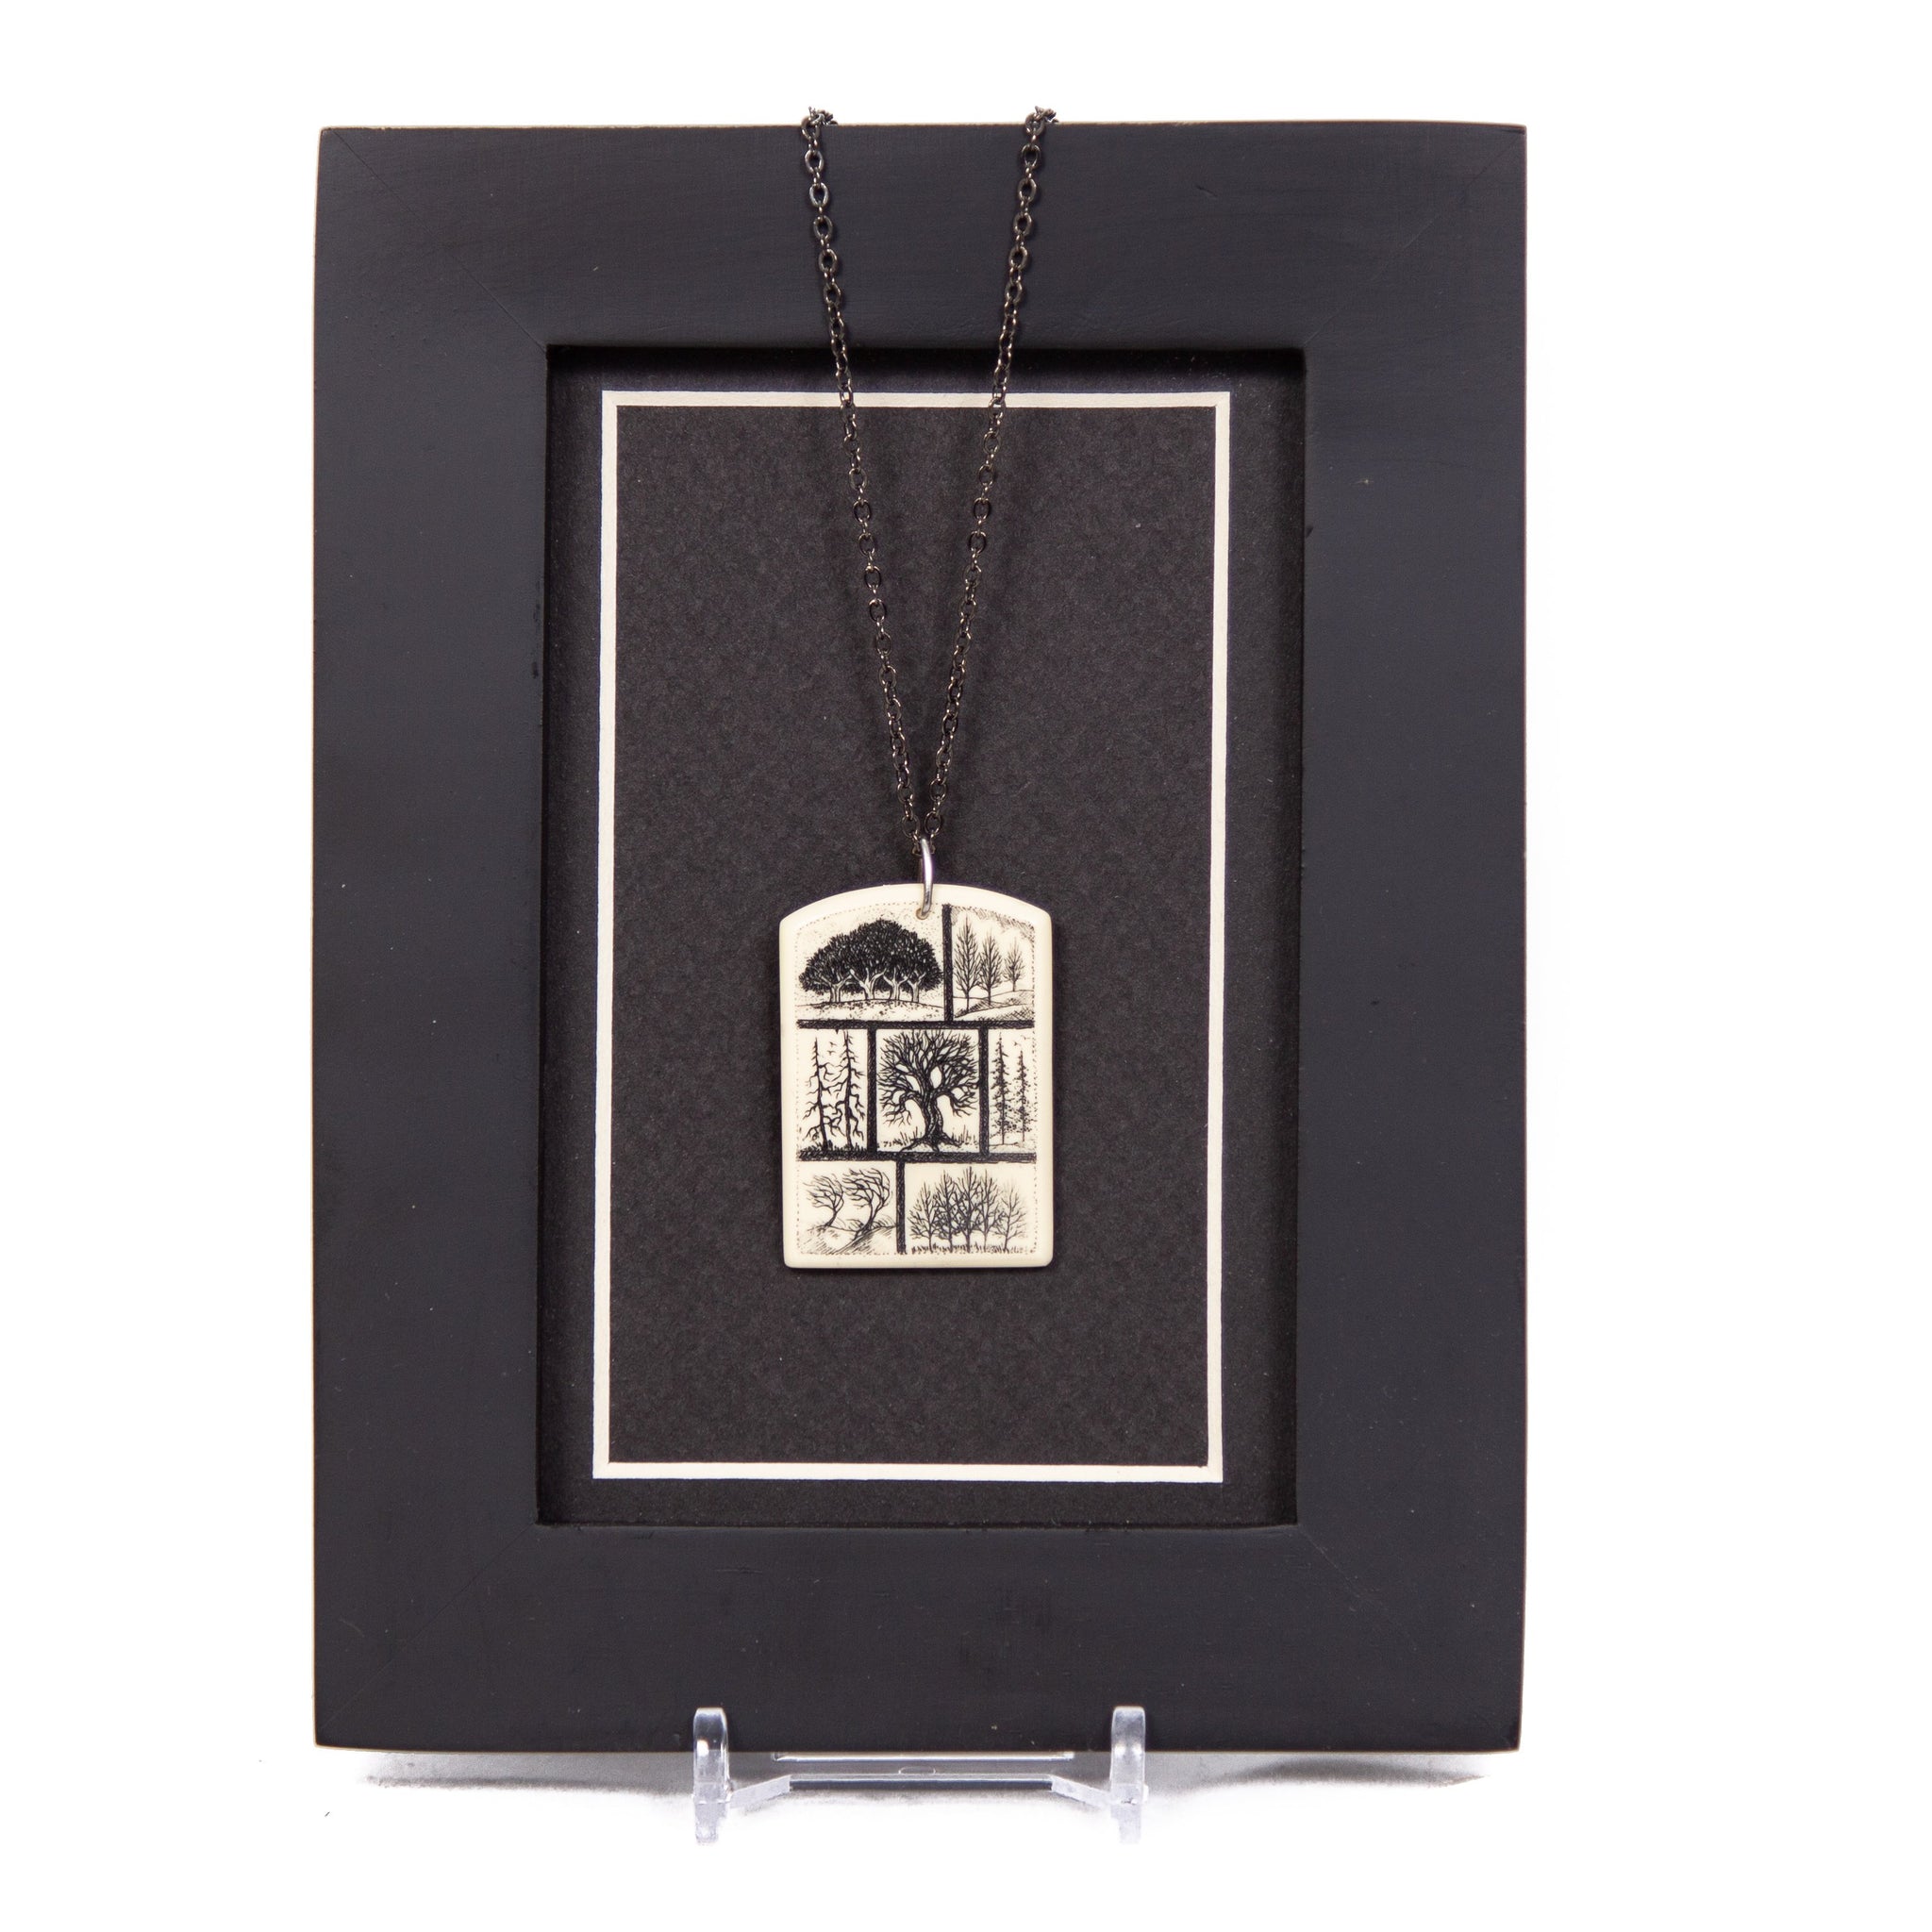 "Passages" Necklace with Chain